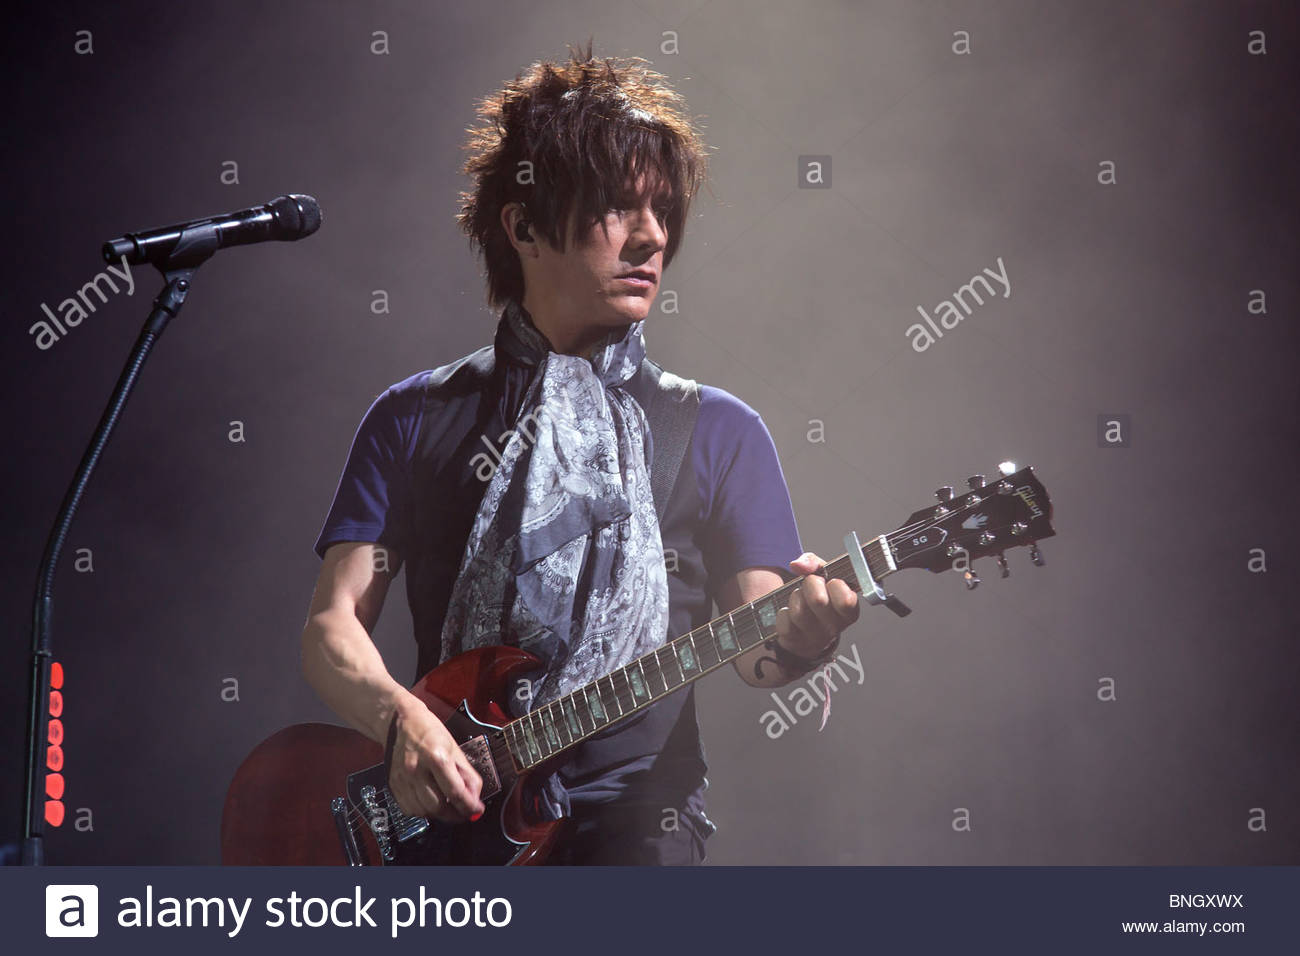 Nicola Sirkis singer and guitar player of french band Indochine Stock ...